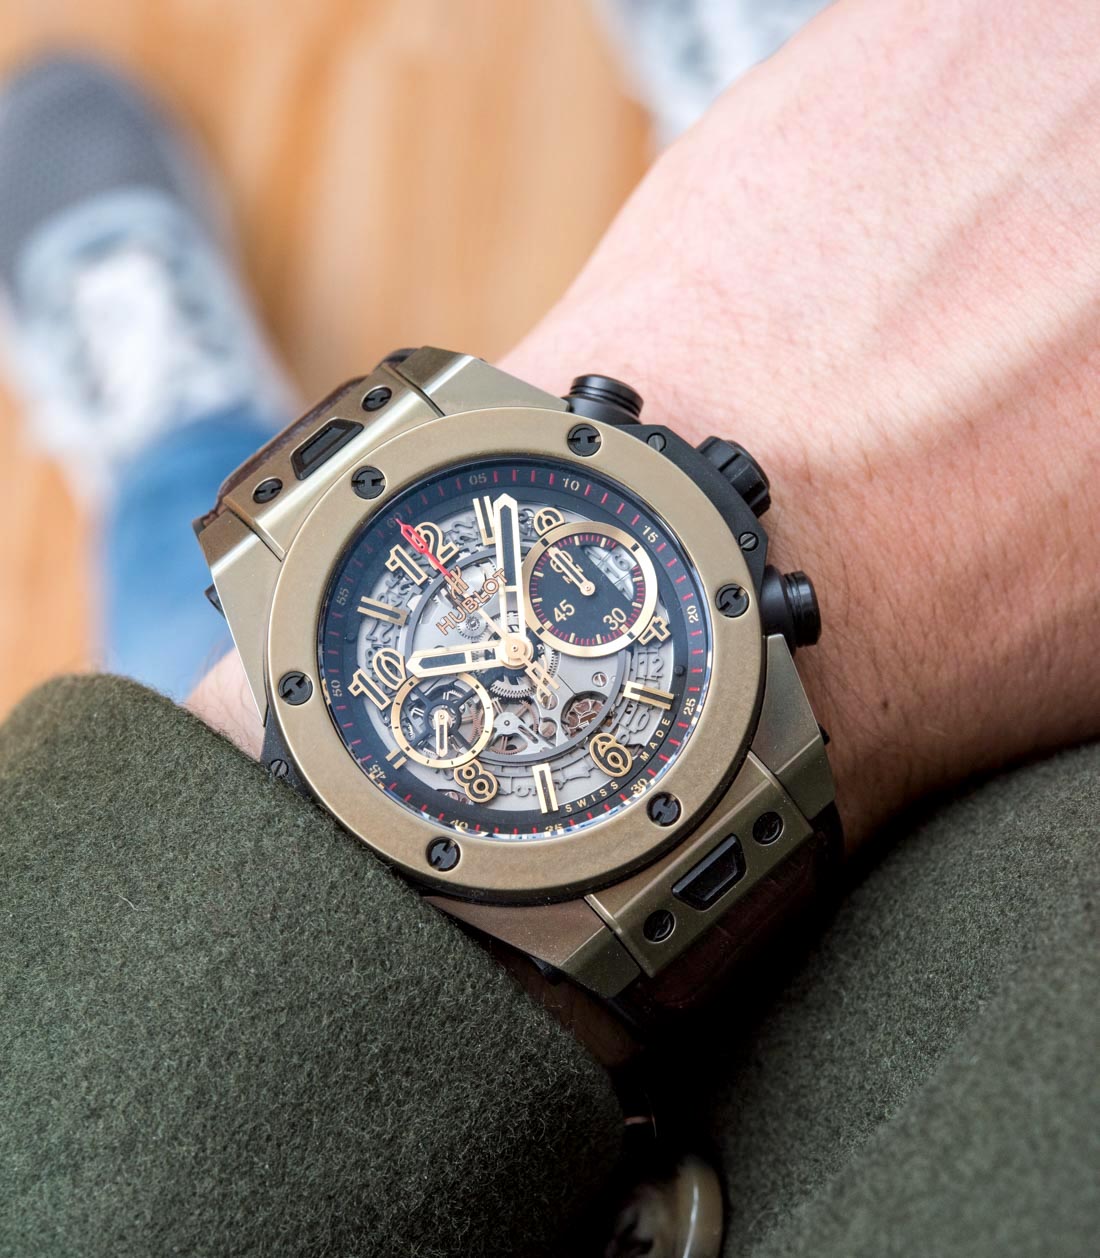 Hublot Big Bang Unico Magic Gold Watch Review – Just How Magical Is It ...